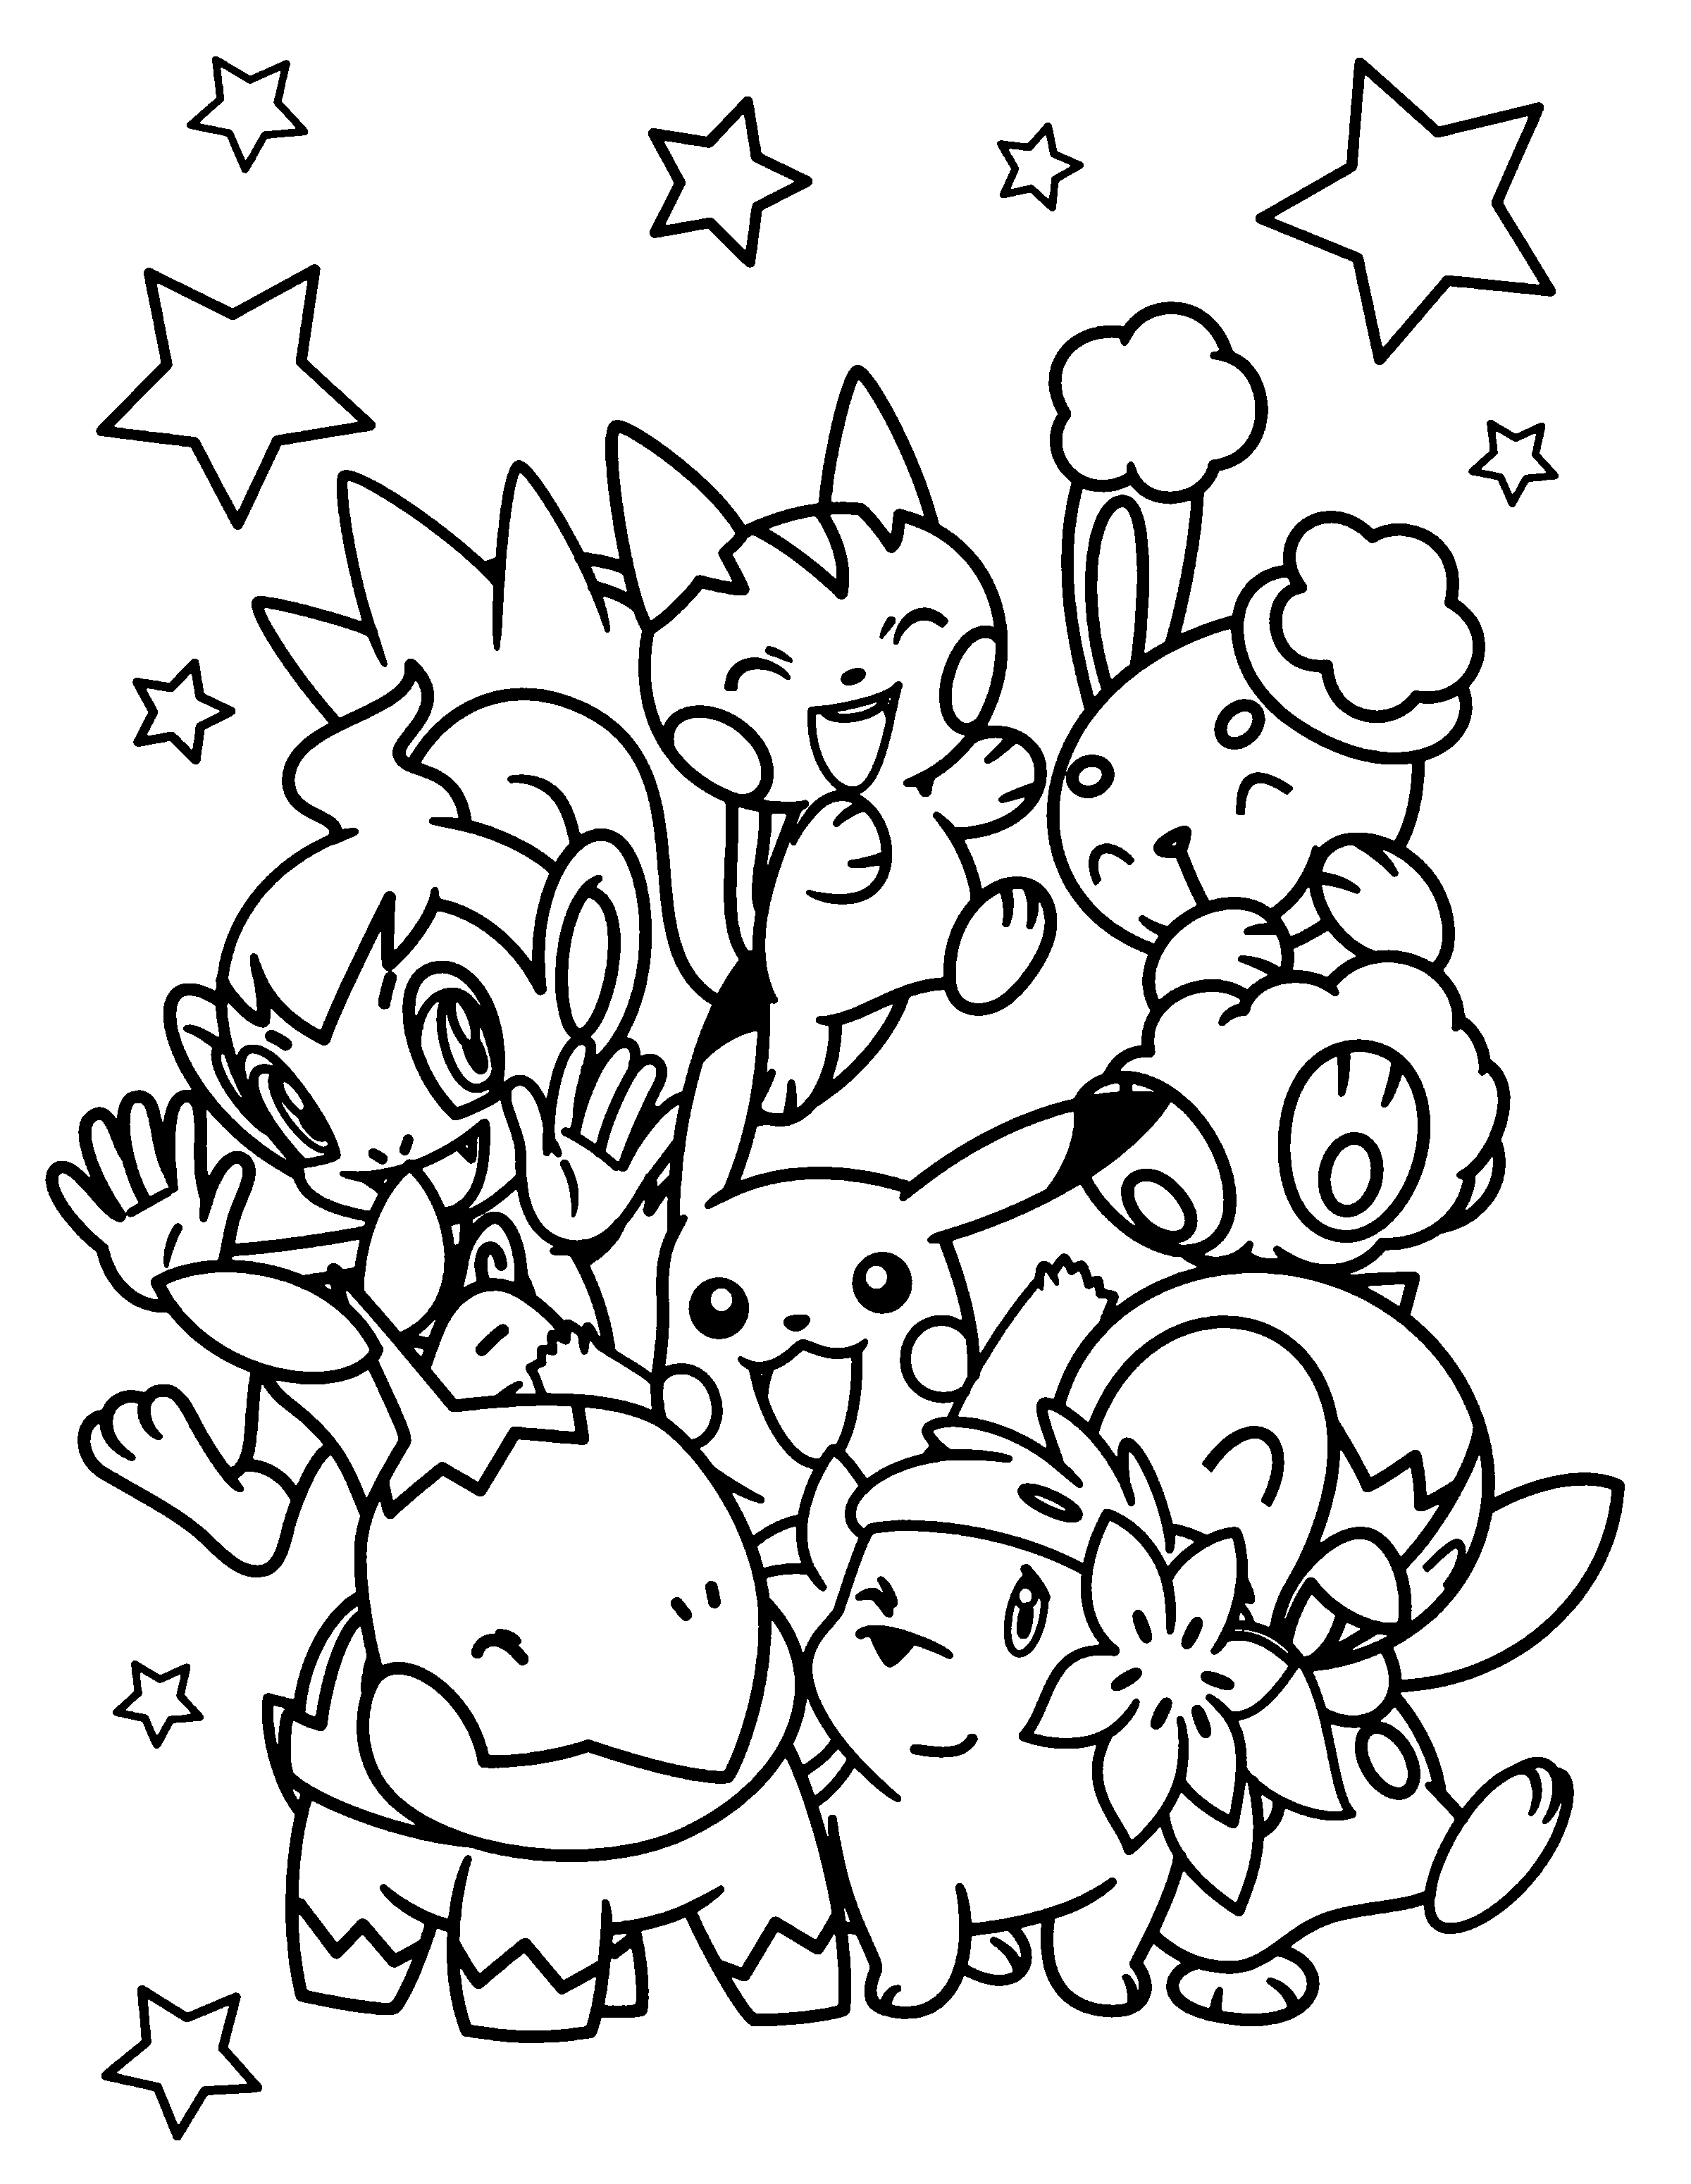 pokemon-free-to-color-for-kids-all-pokemon-coloring-pages-kids